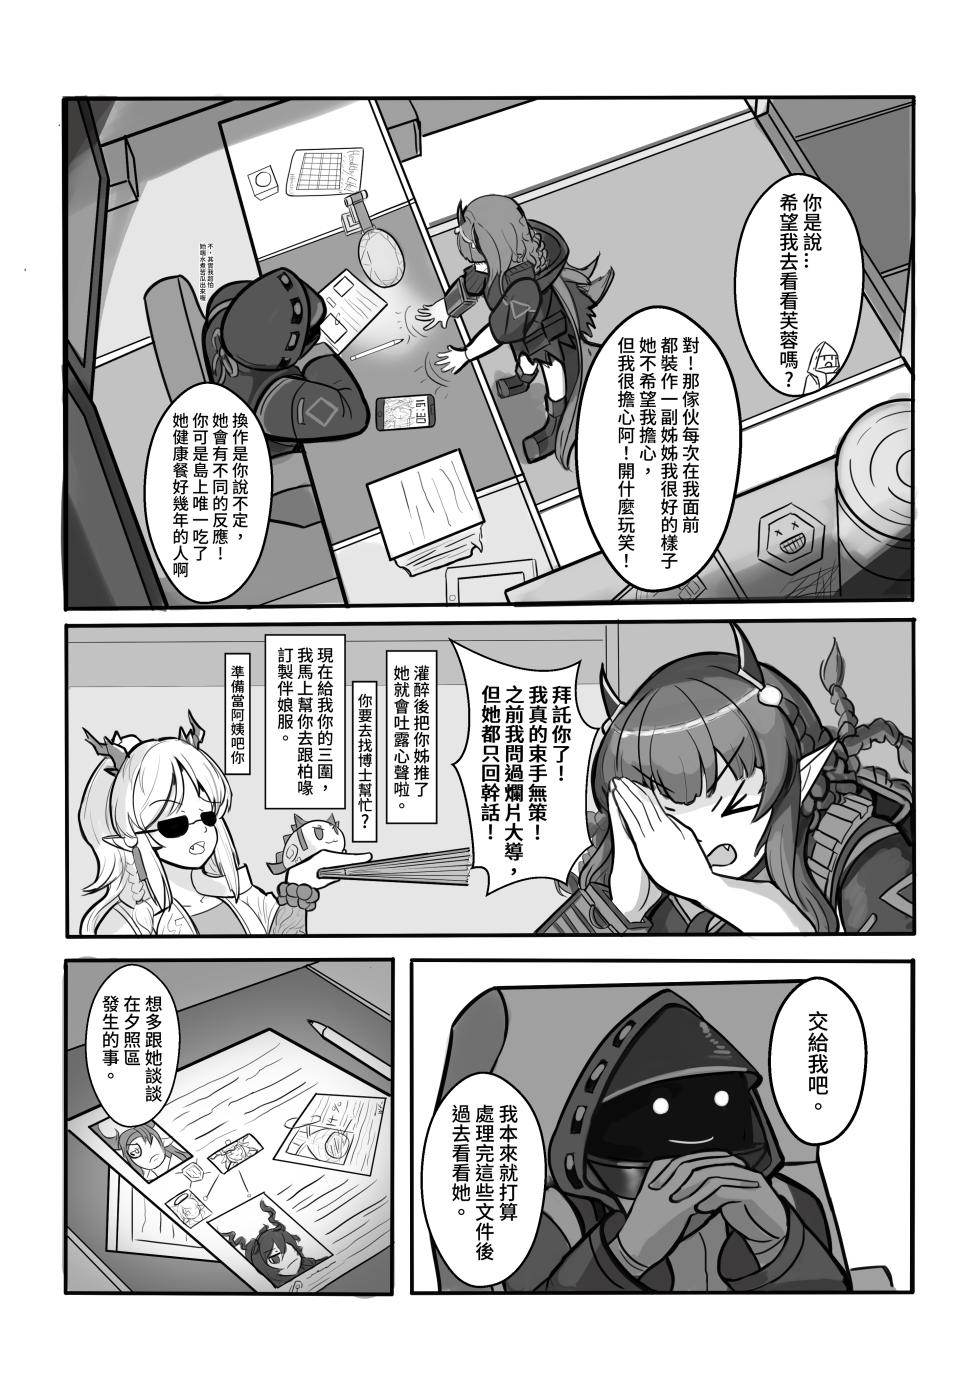 Afterglow-夕照之後 (Arknights) - Page 6